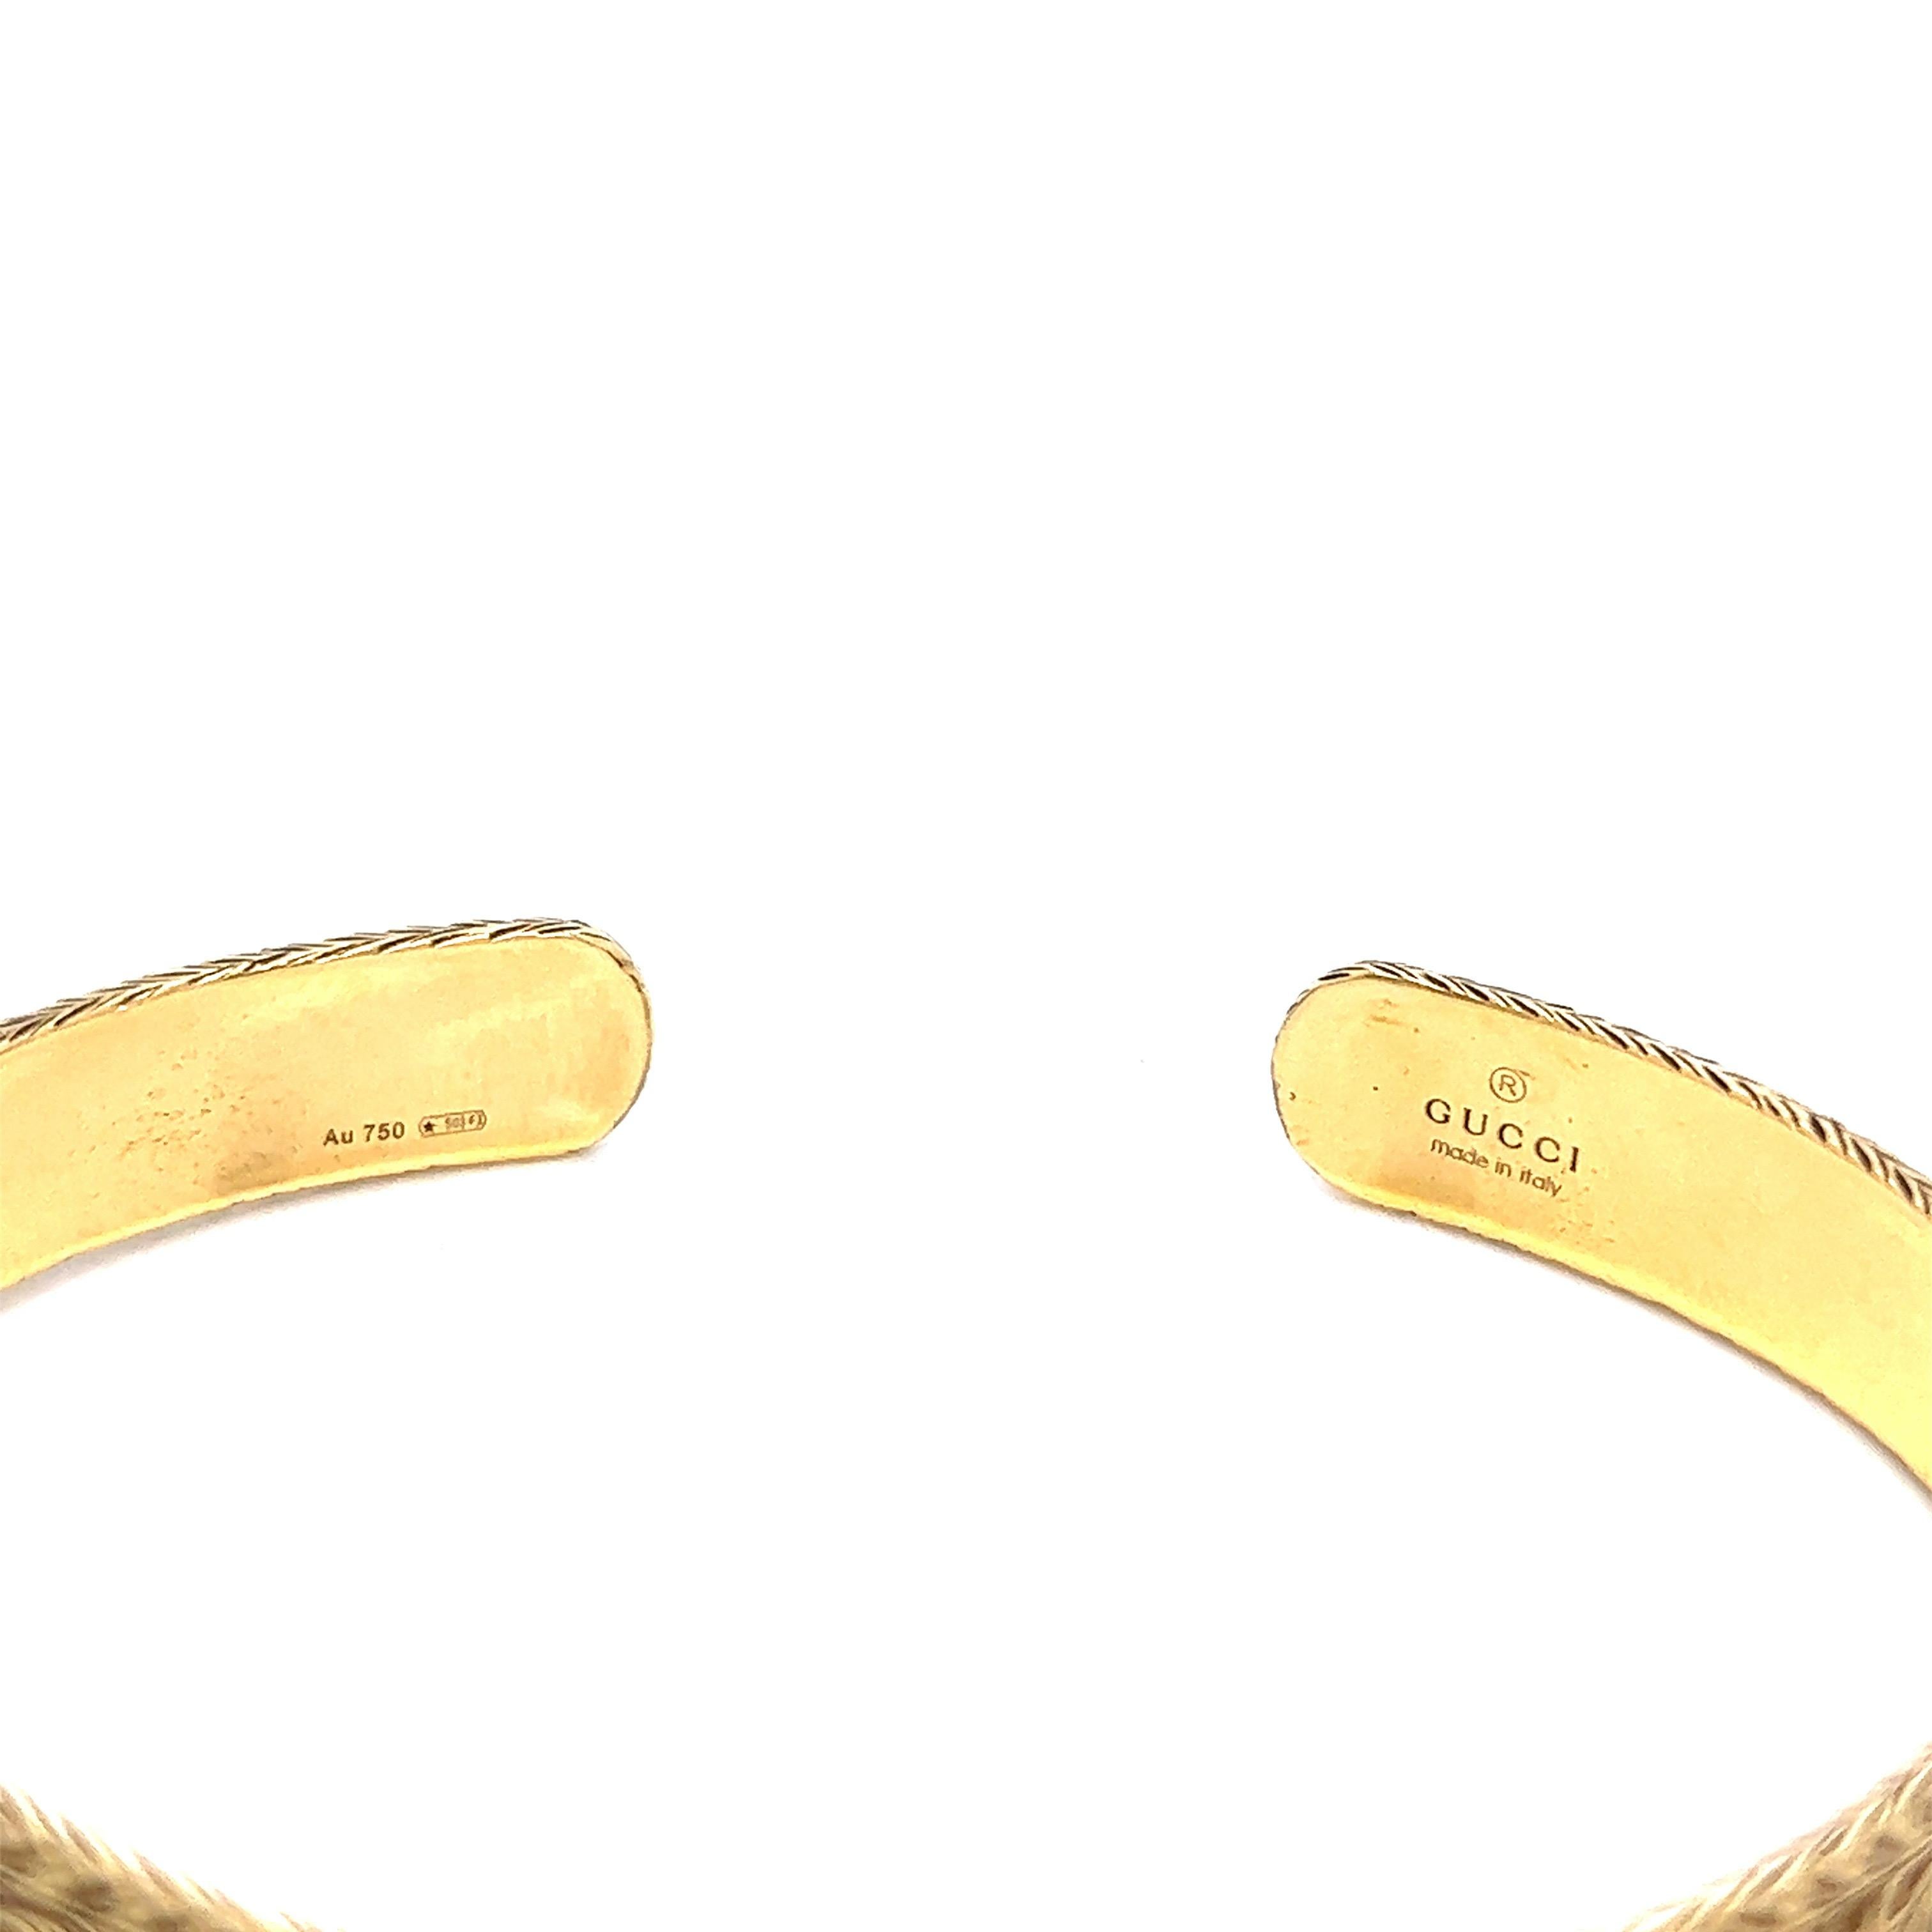 Gucci Gold Bangle Bracelet In Excellent Condition For Sale In New York, NY